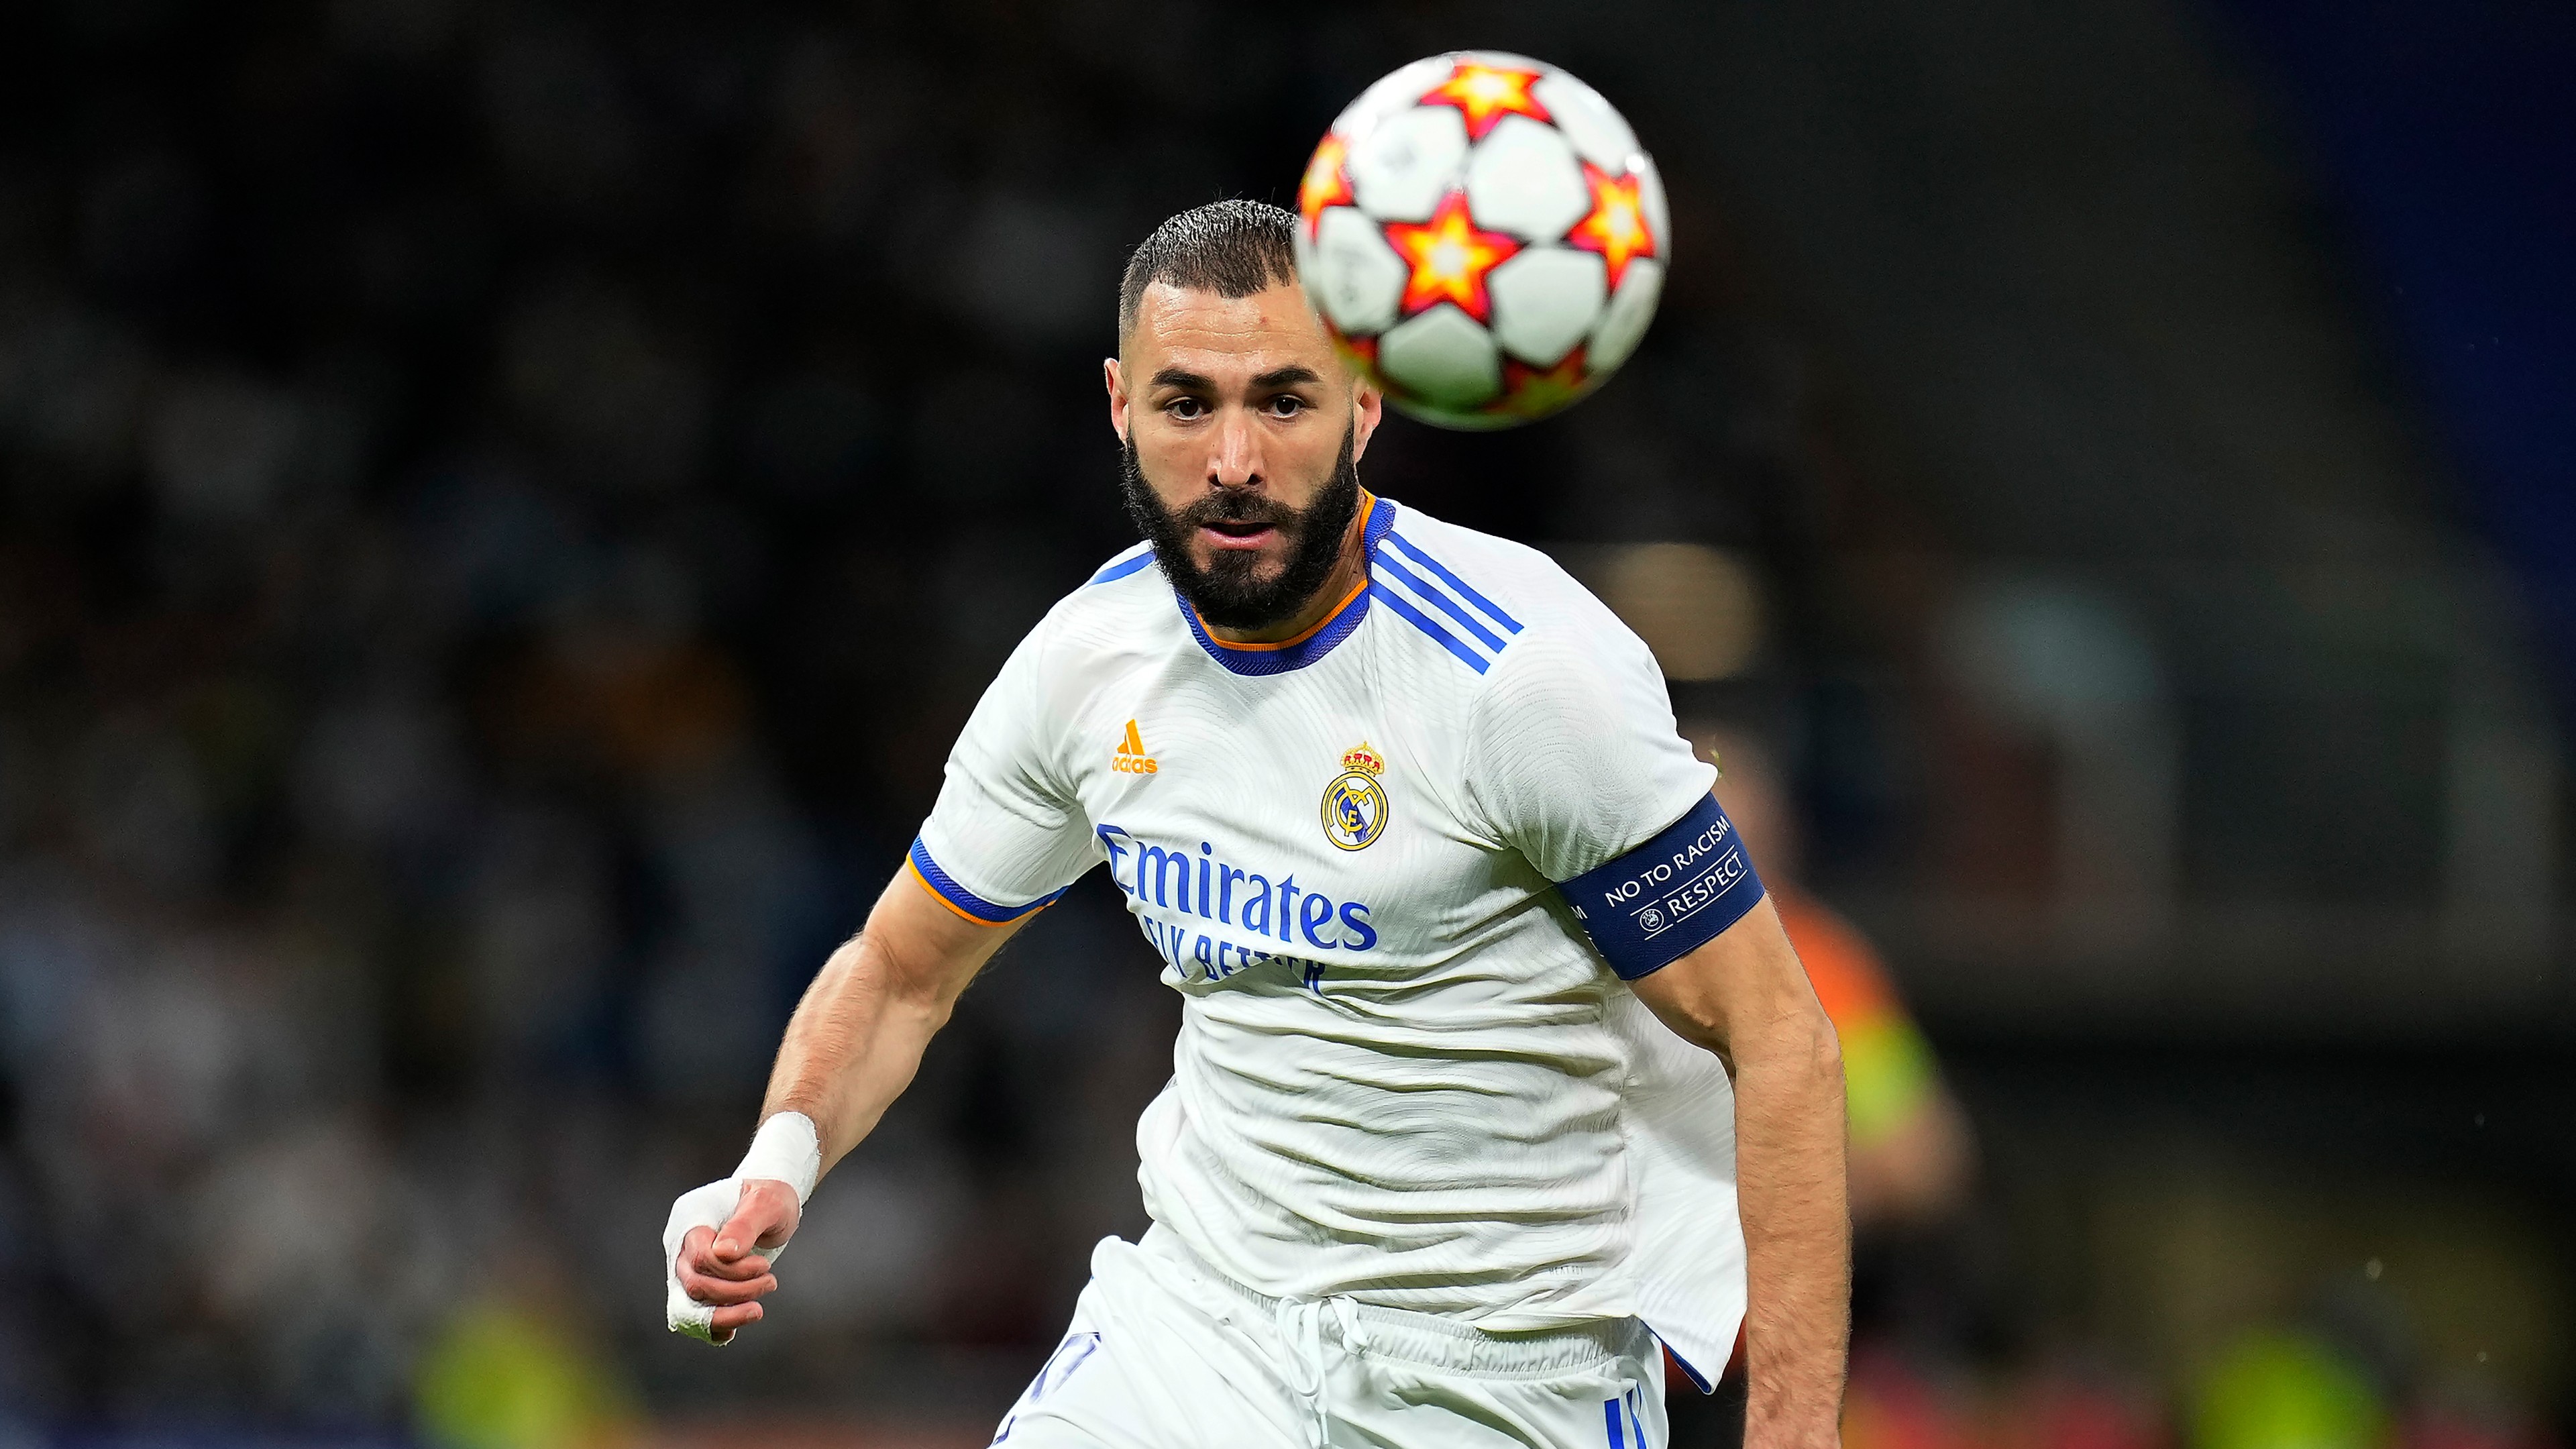 Real Madrid S Karim Benzema Gets 1 Year Suspended Prison Sentence In Sex Tape Trial